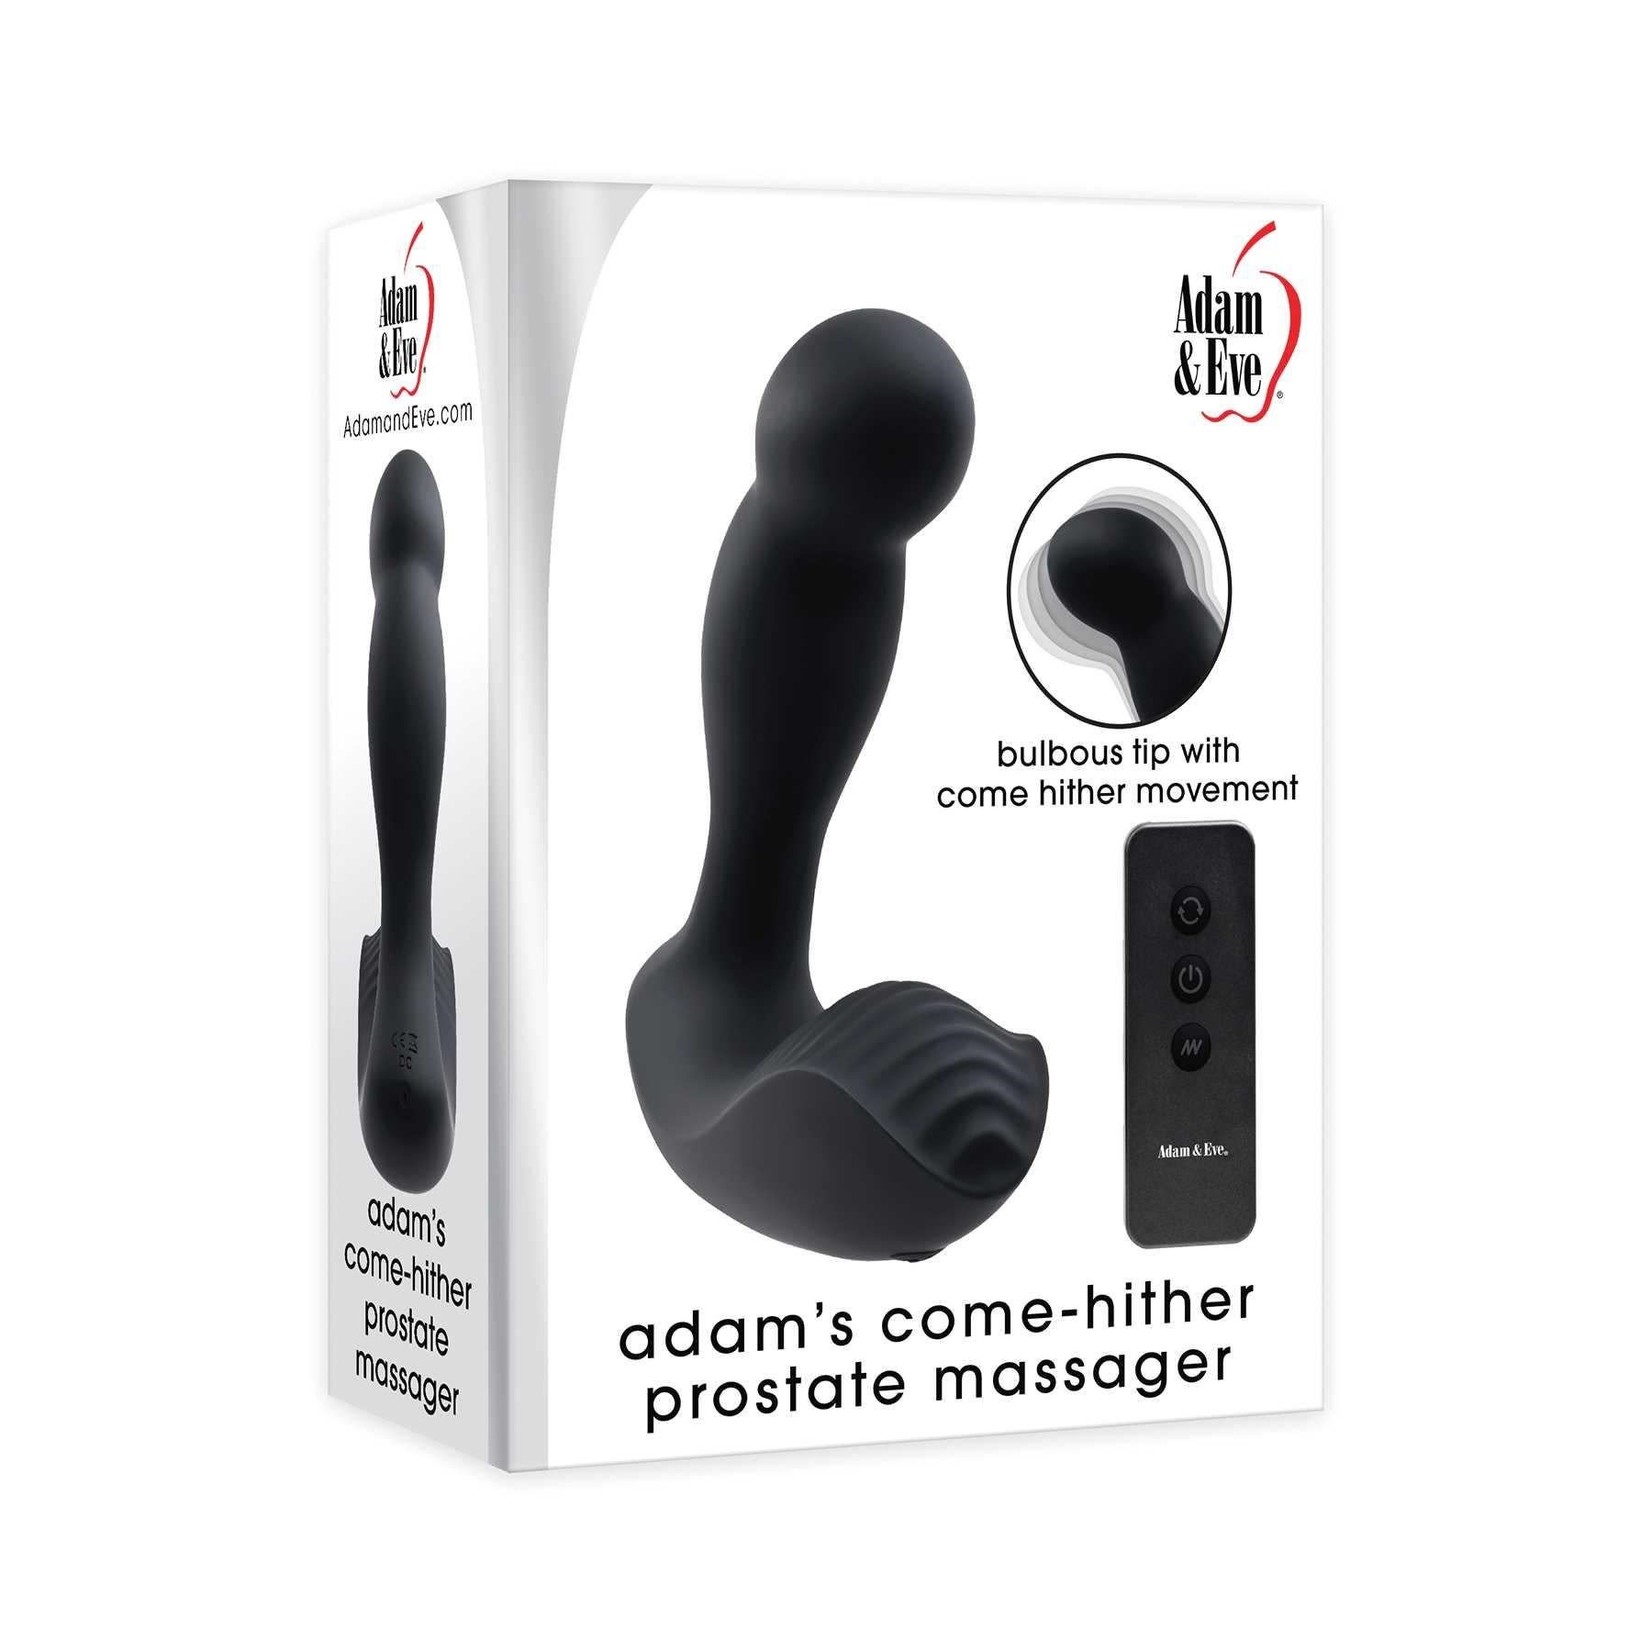 ADAM & EVE ADAM'S COME HITHER PROSTATE MASSAGER